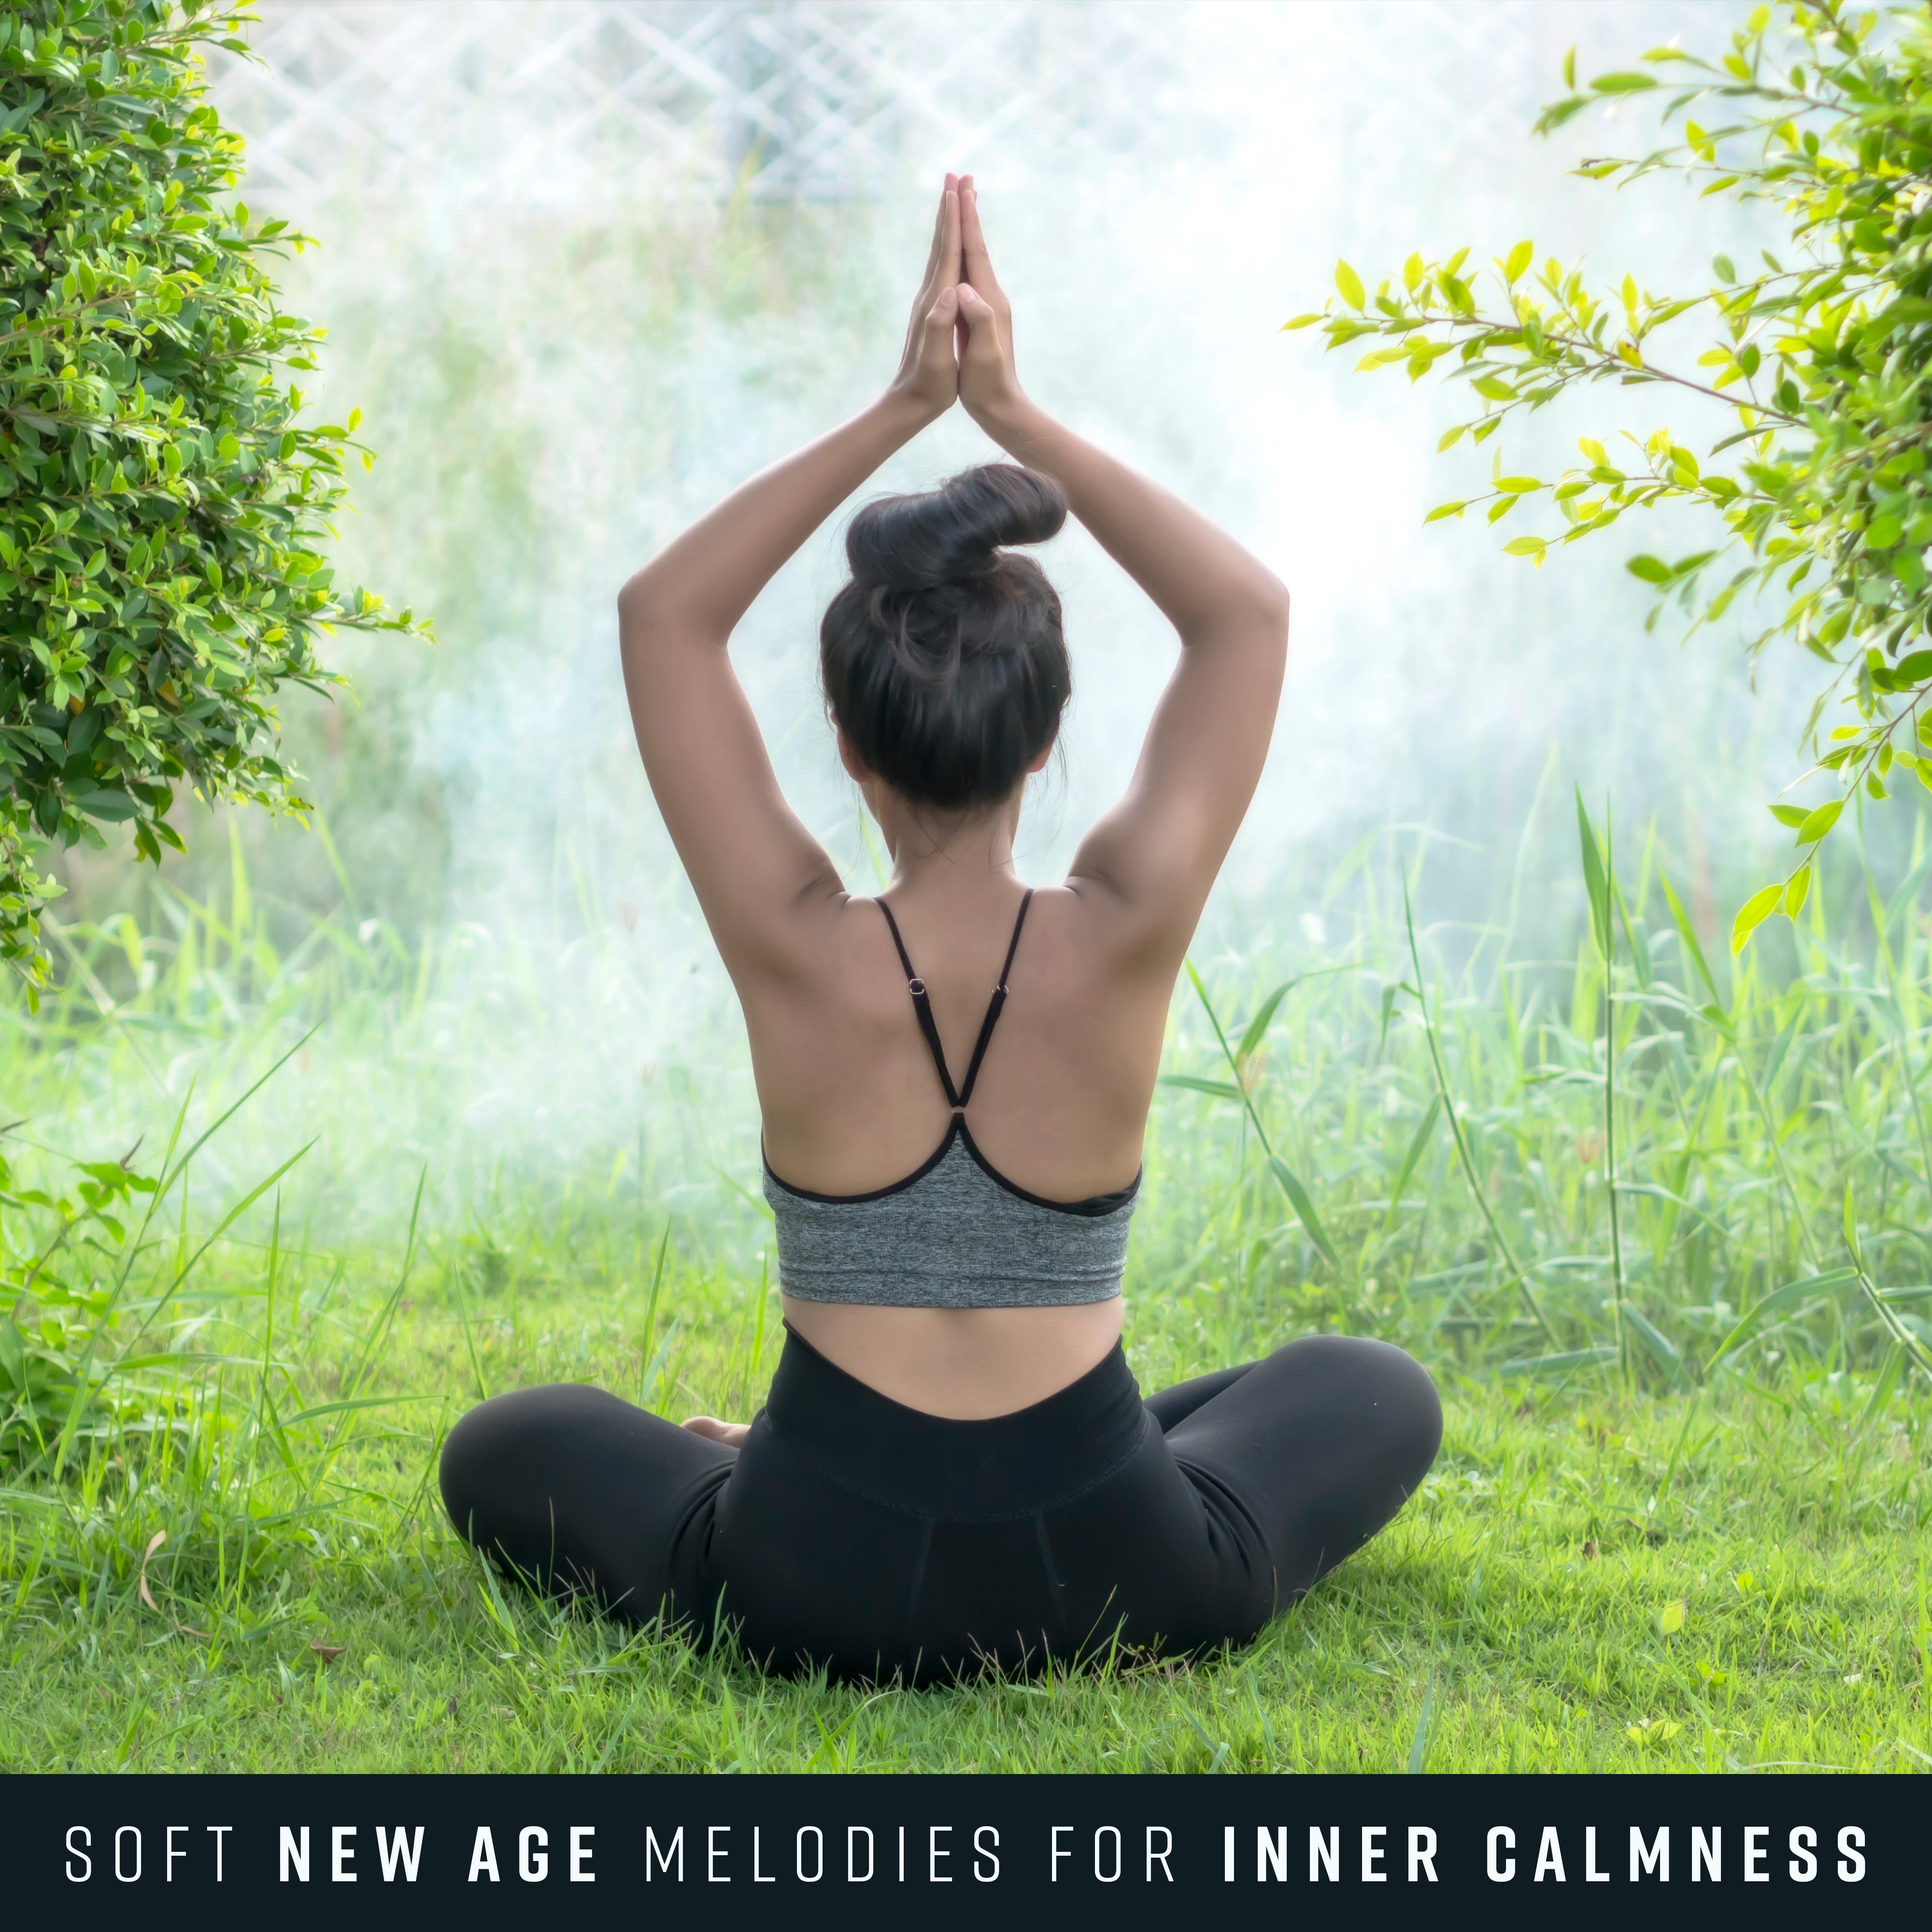 Soft New Age Melodies for Inner Calmness